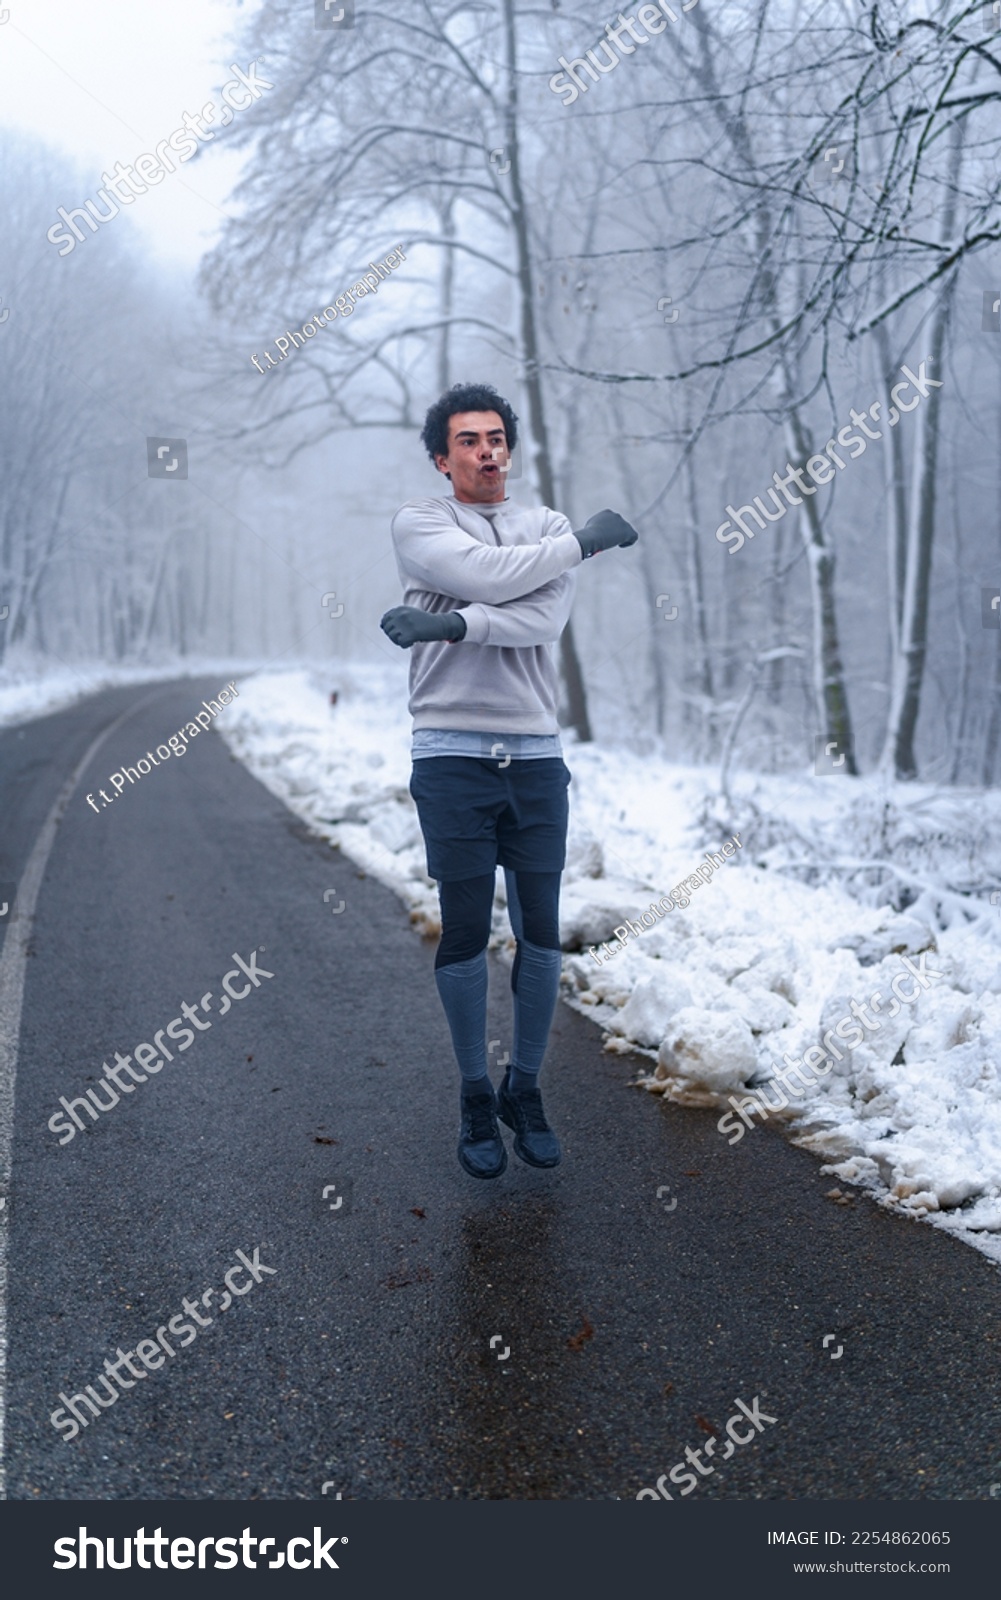 Warm up before going on a run in the foods on a snowy winter day, trees and ground are cover in snow #2254862065